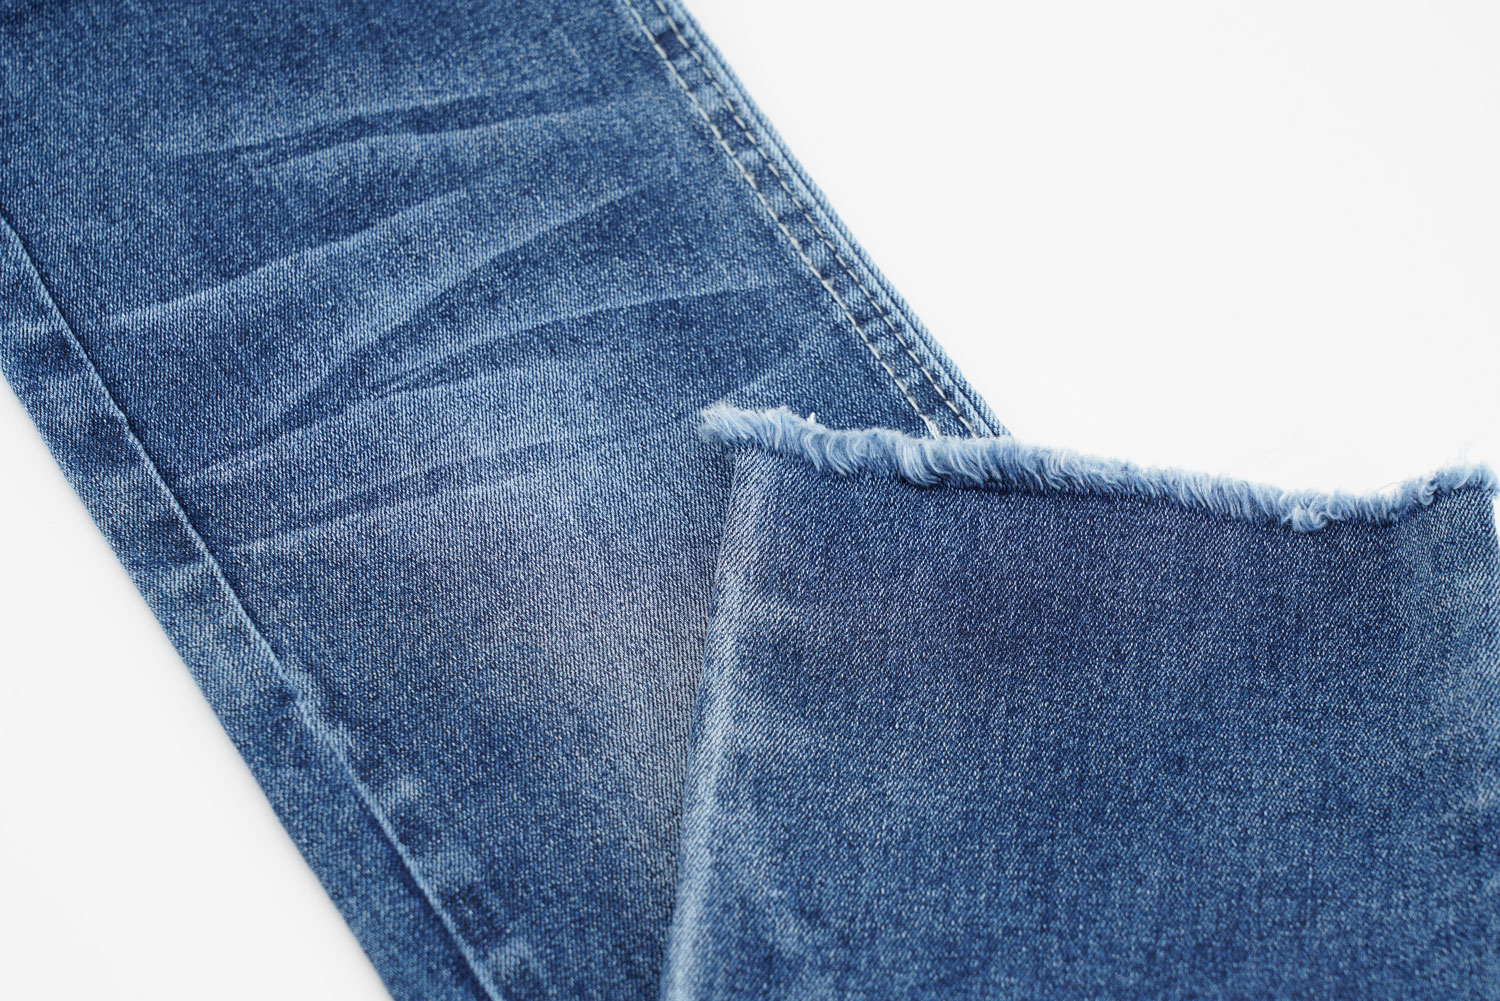 How to Use a Stretch Denim Material: 5 Key Tips You Should Know 2